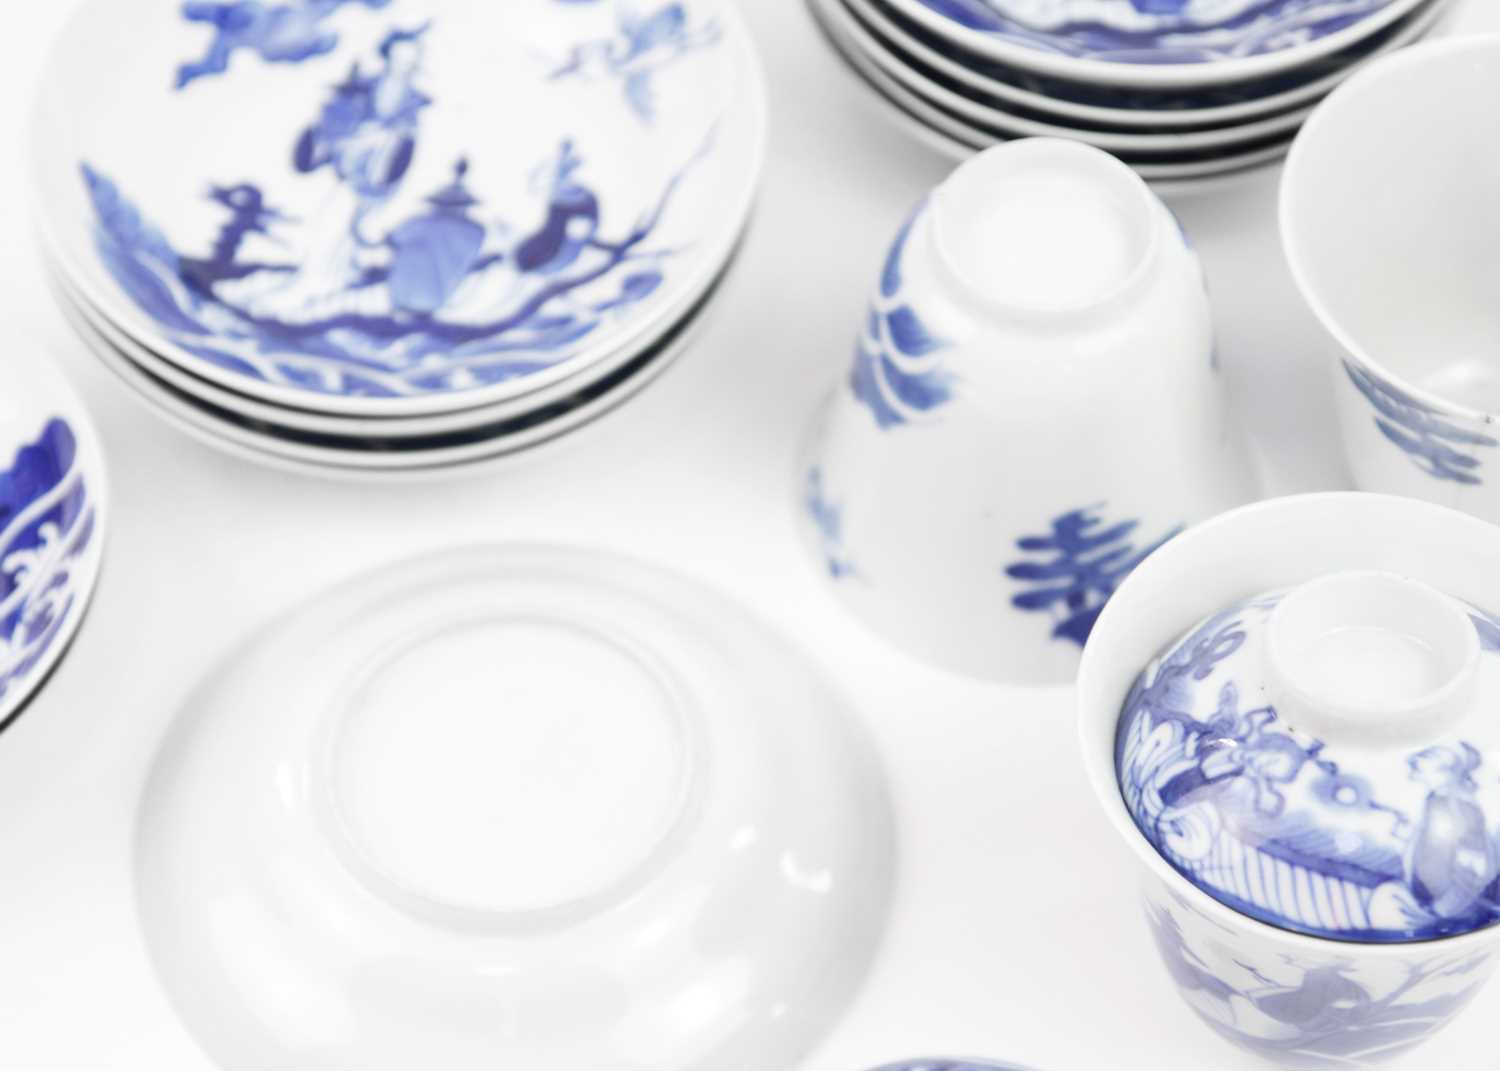 A set of Chinese blue and white porcelain cups, covers and stands, 18th century. - Image 11 of 41